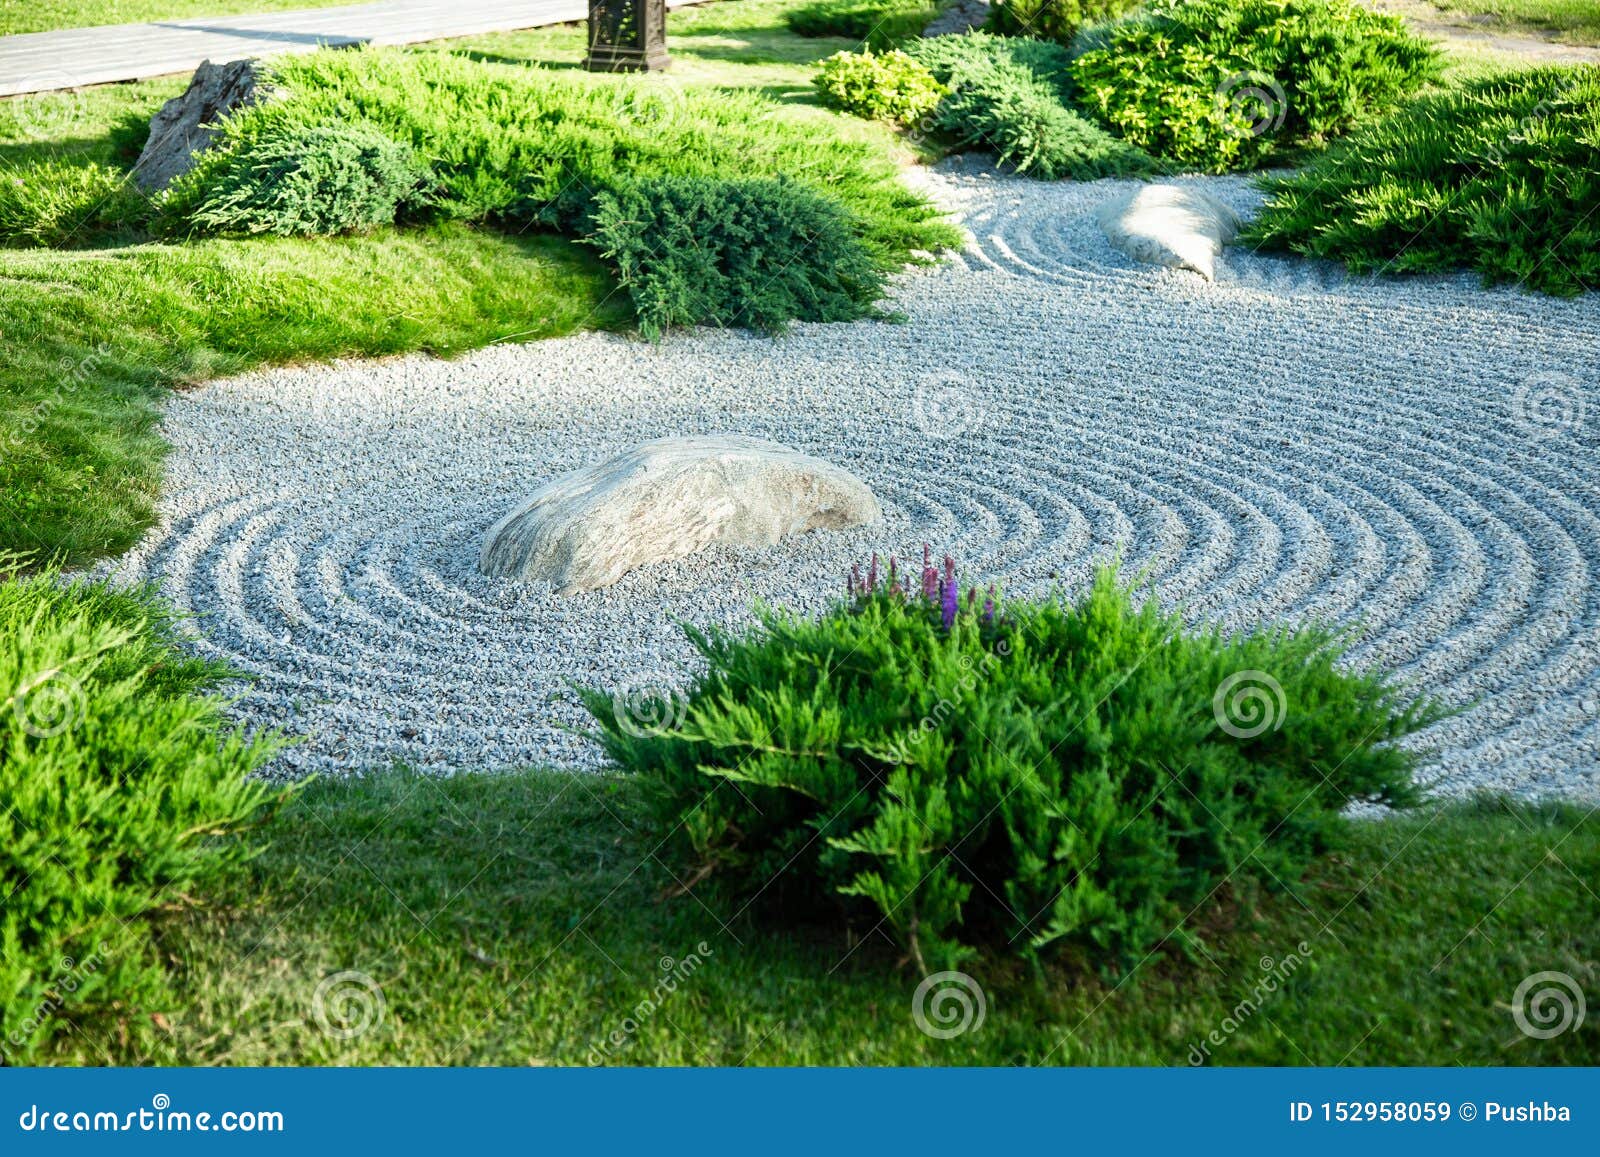 Japanese Rock Garden in the Garden Stock Image - Image of buddhism ...